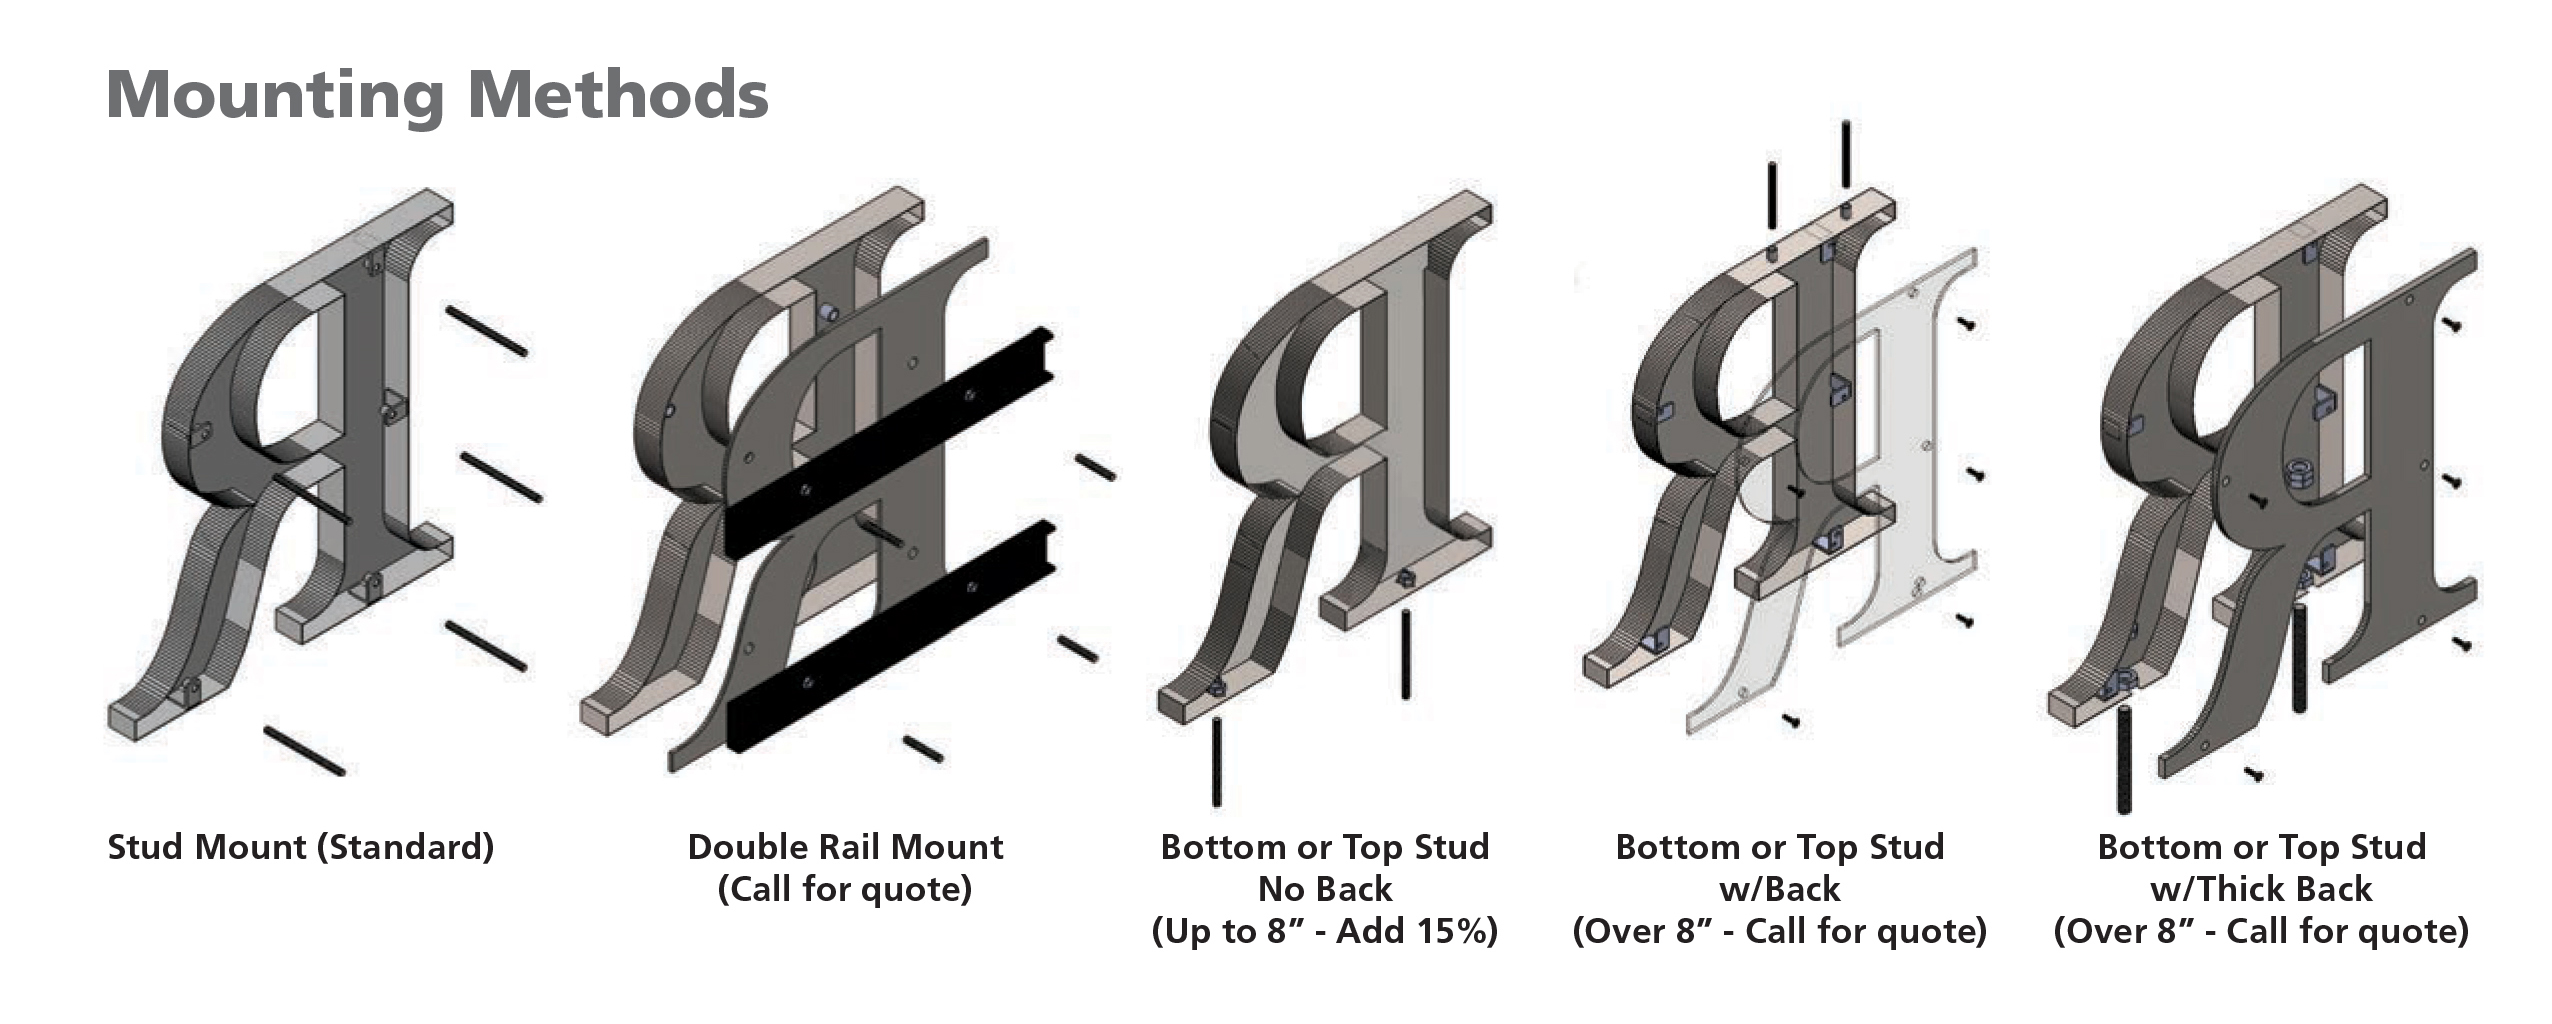 Fabricated Metal Mounting Options